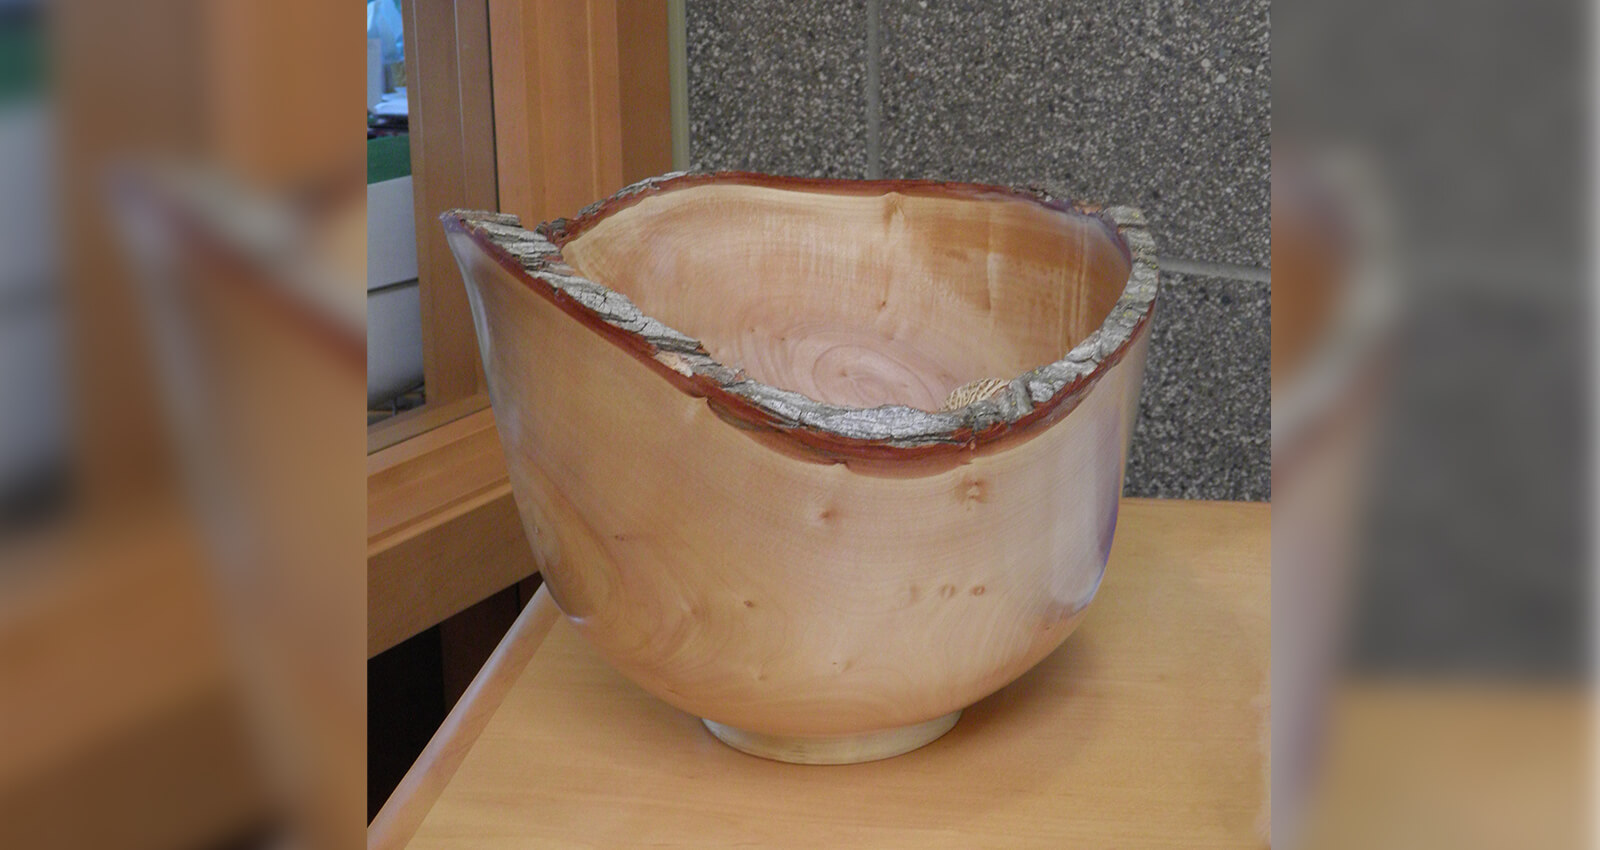 Decorative Wooden Bowl artwork on display in Port Offices.